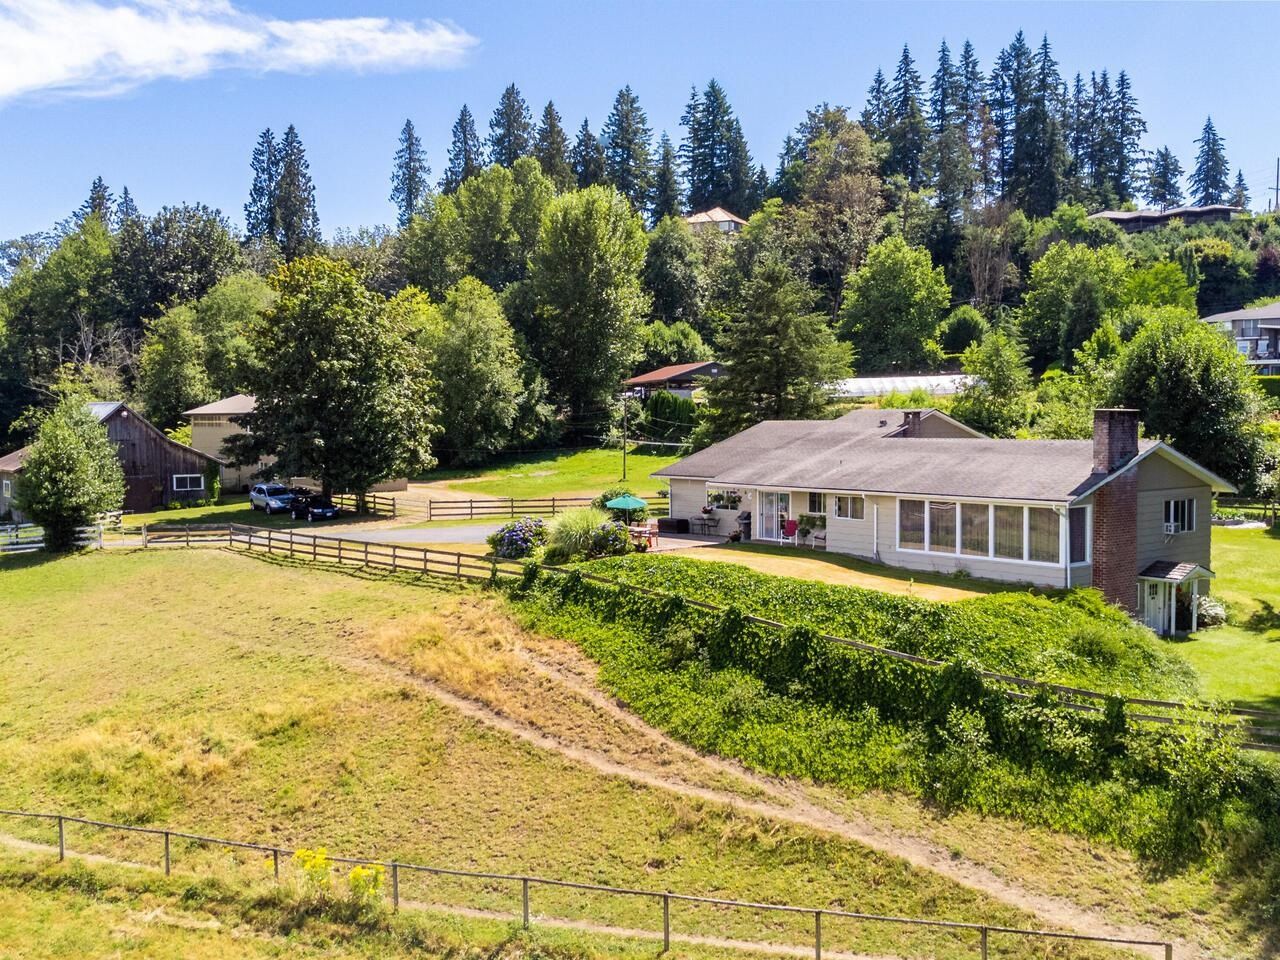 New property listed in County Line Glen Valley, Langley